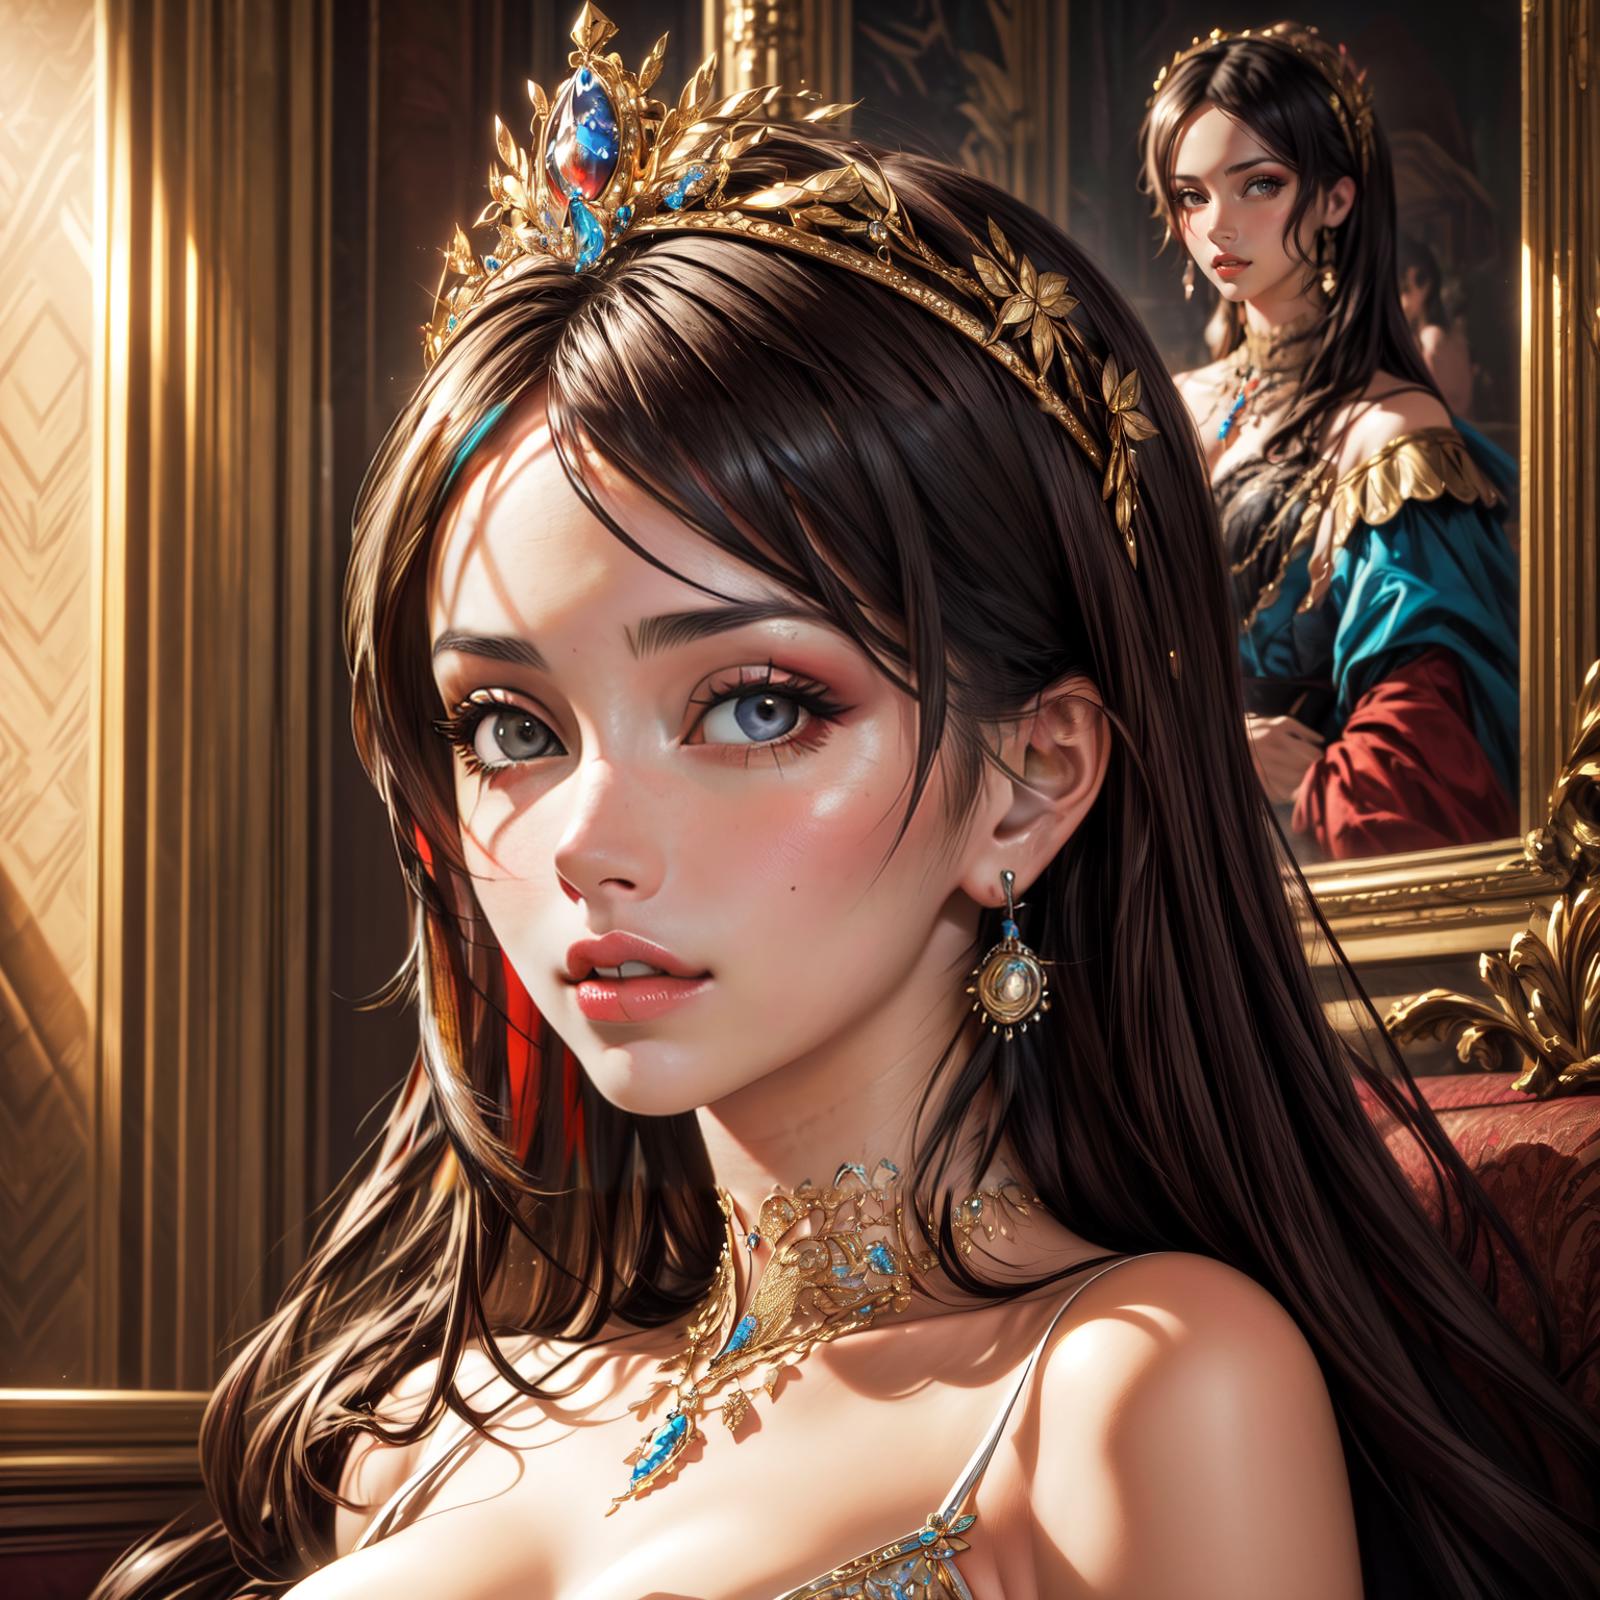 A beautiful illustration of a young woman wearing a crown and earrings, looking at her reflection in a mirror.